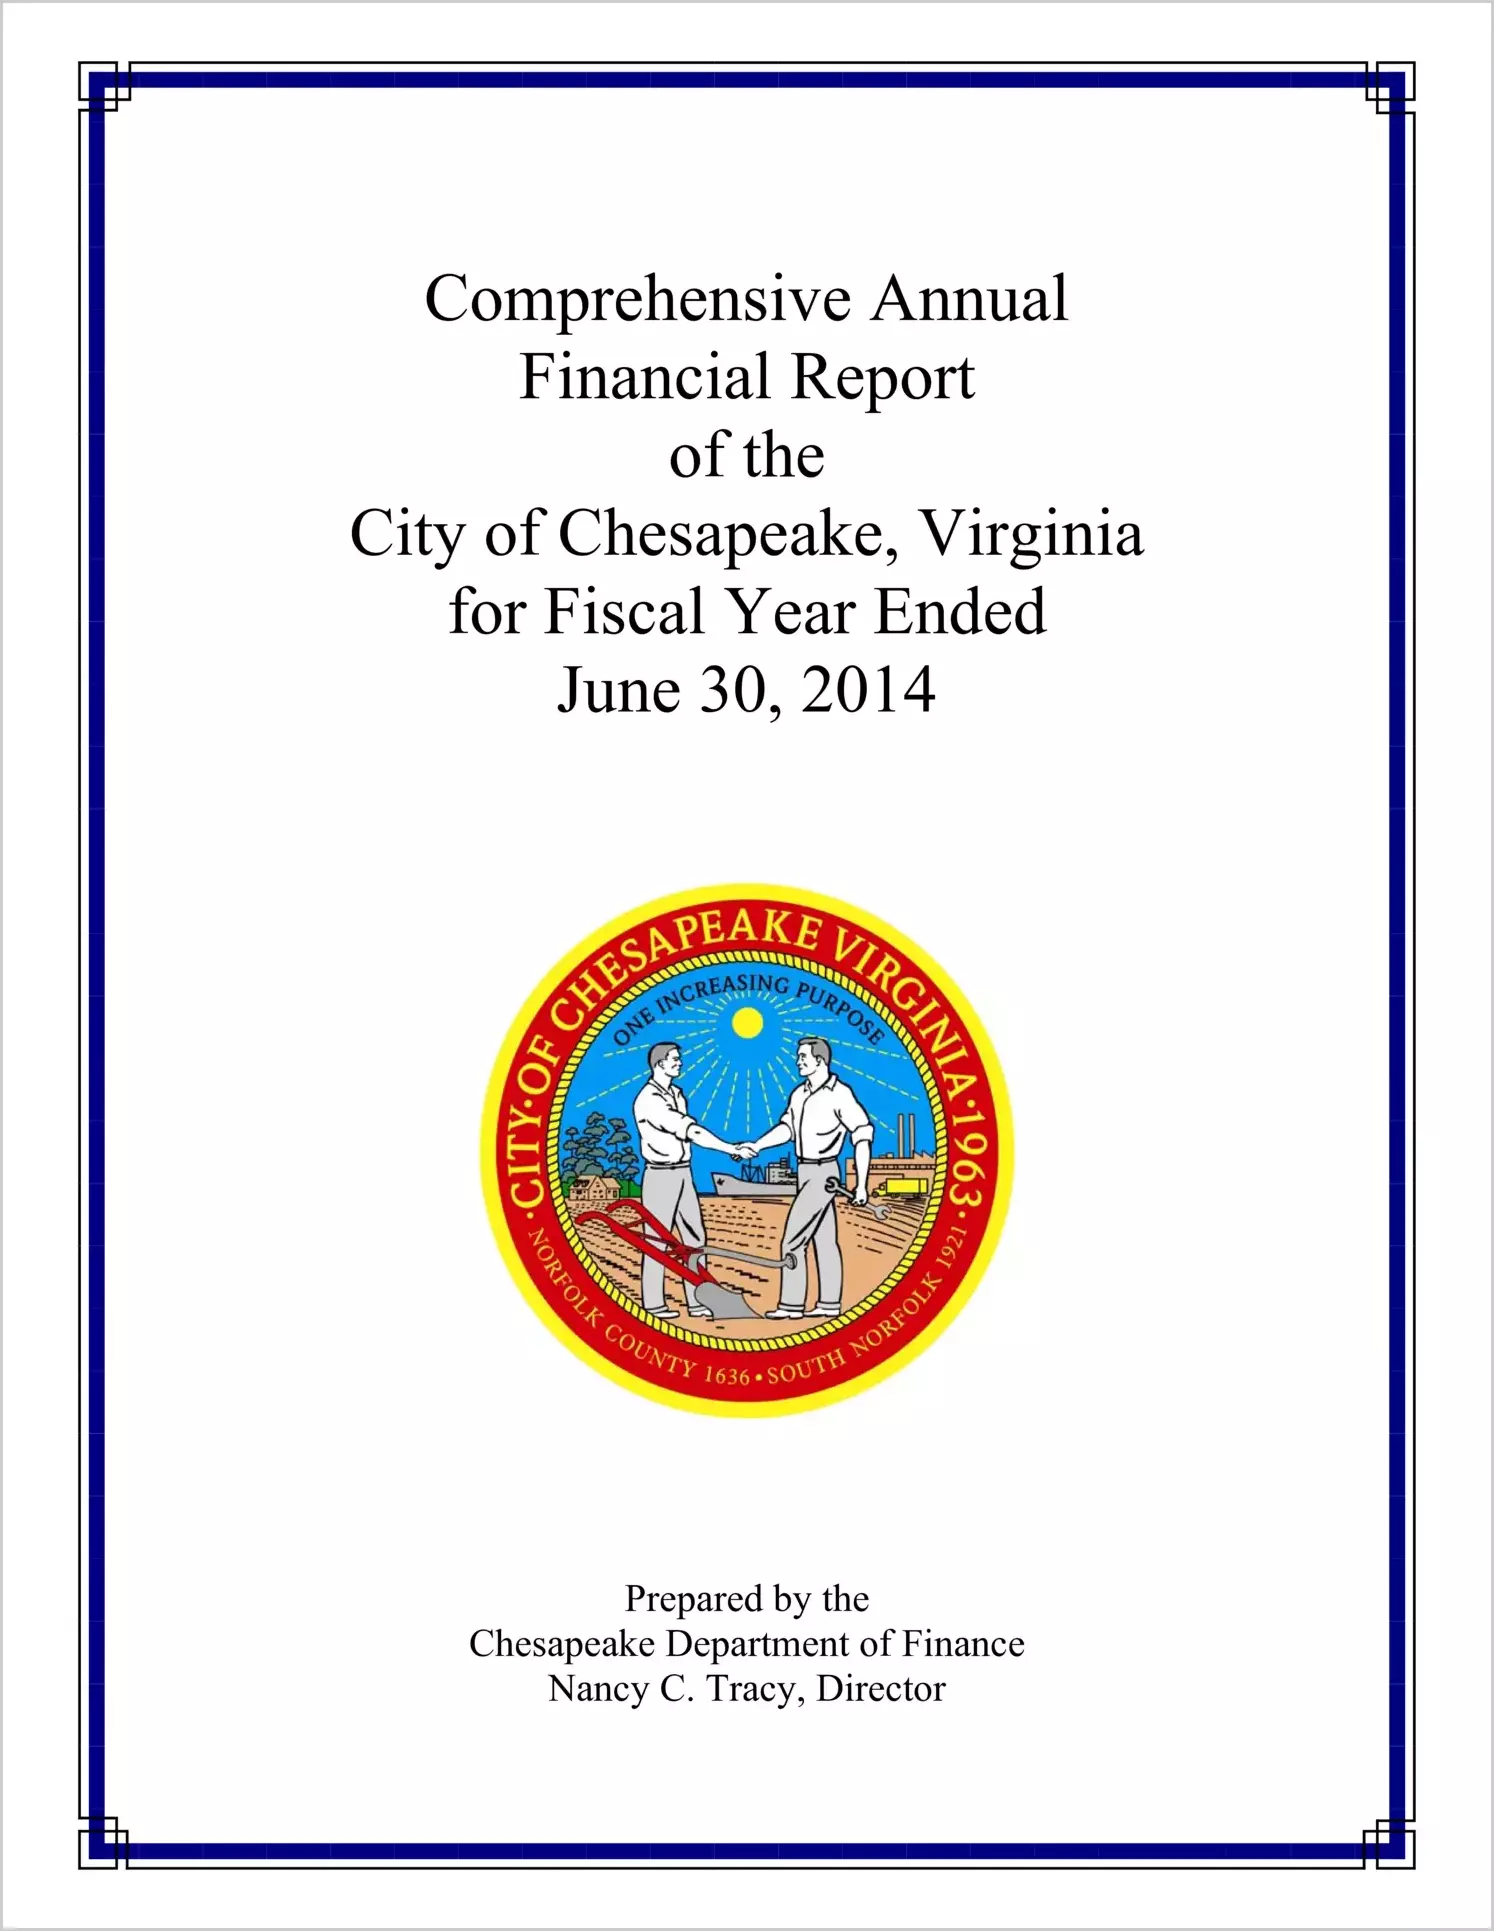 2014 Annual Financial Report for City of Chesapeake